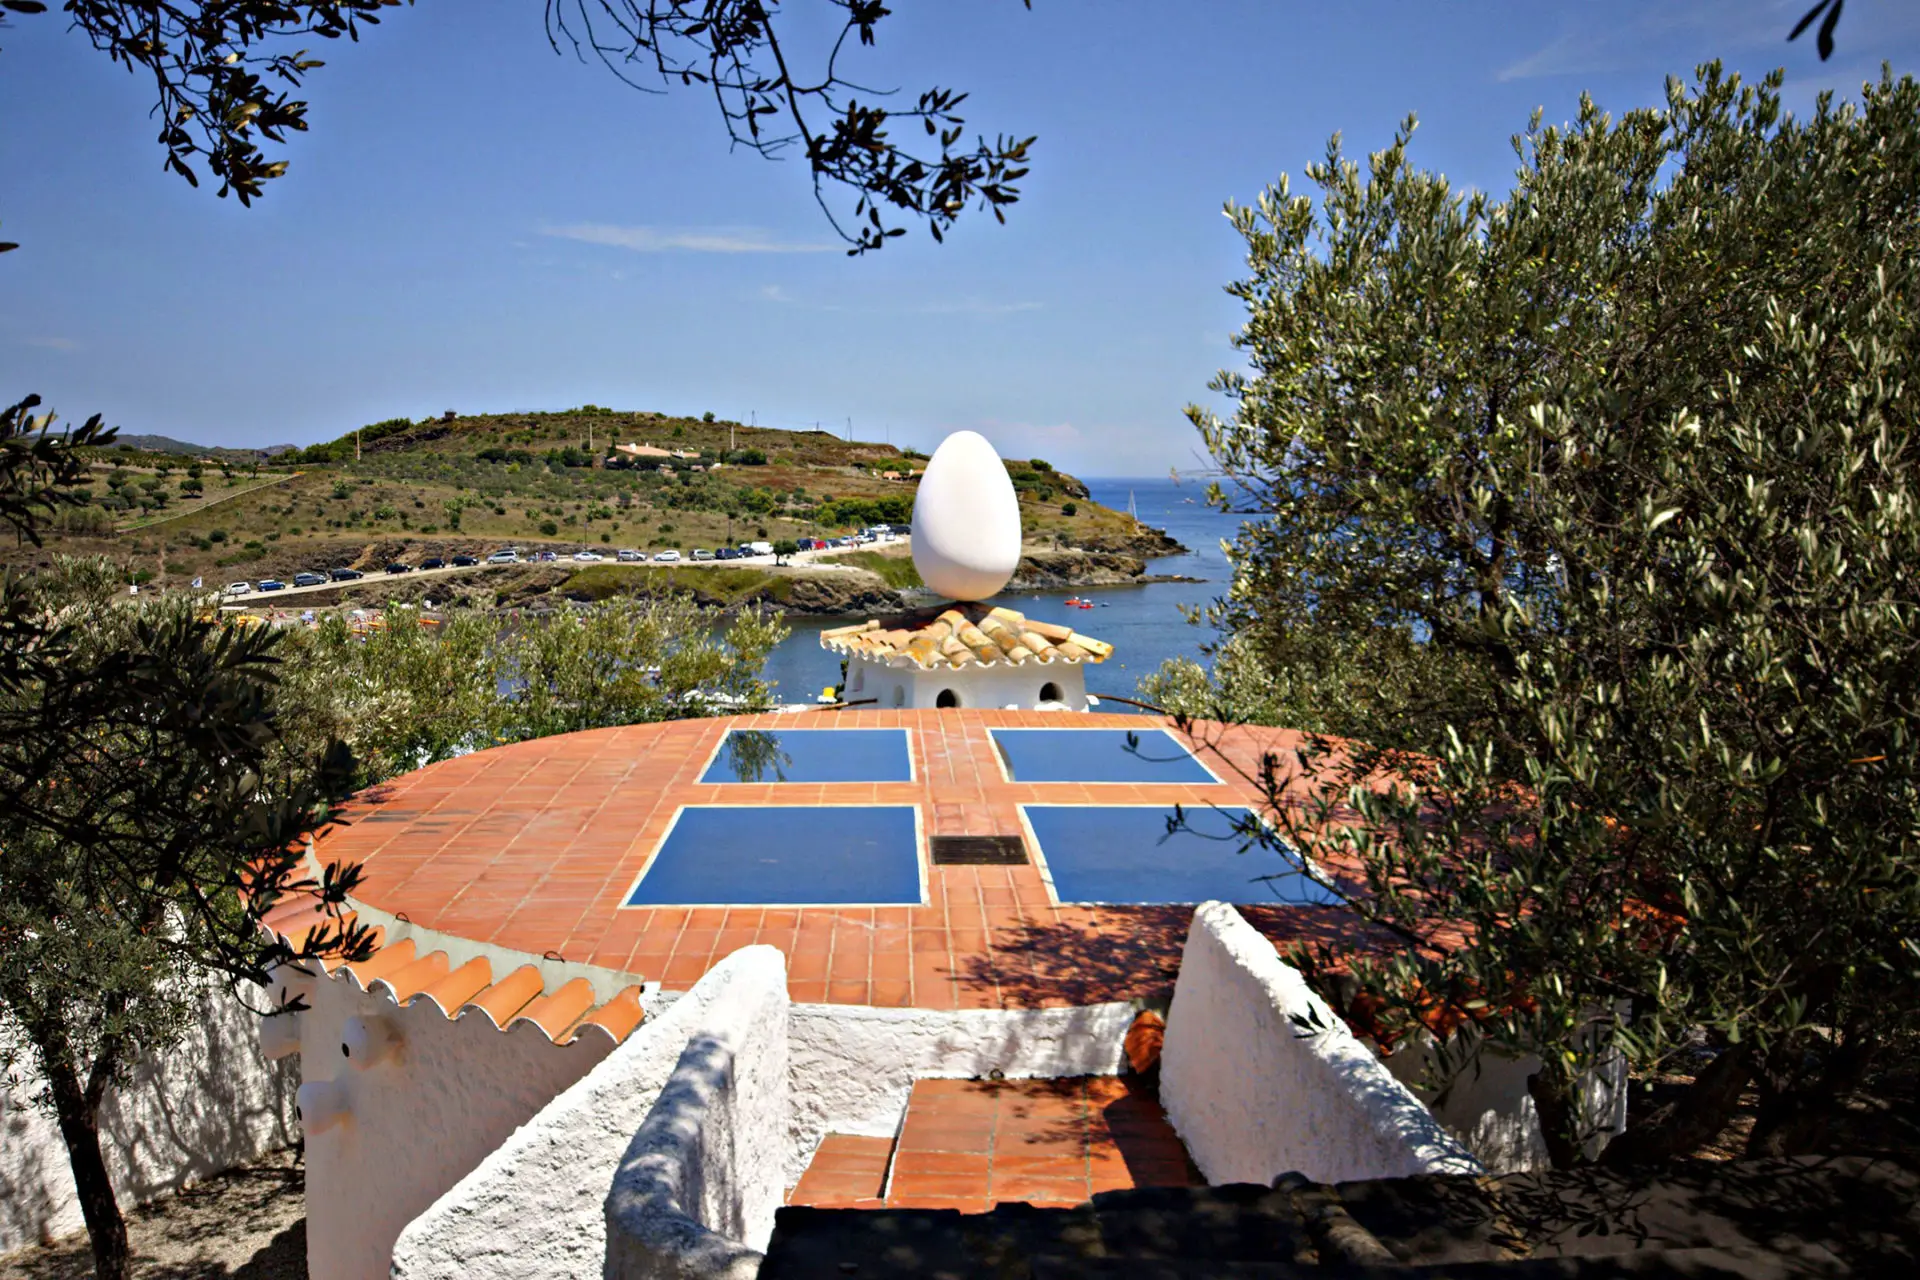 Back patio of Casa Salvador Dali with large egg statue overlooking the bay